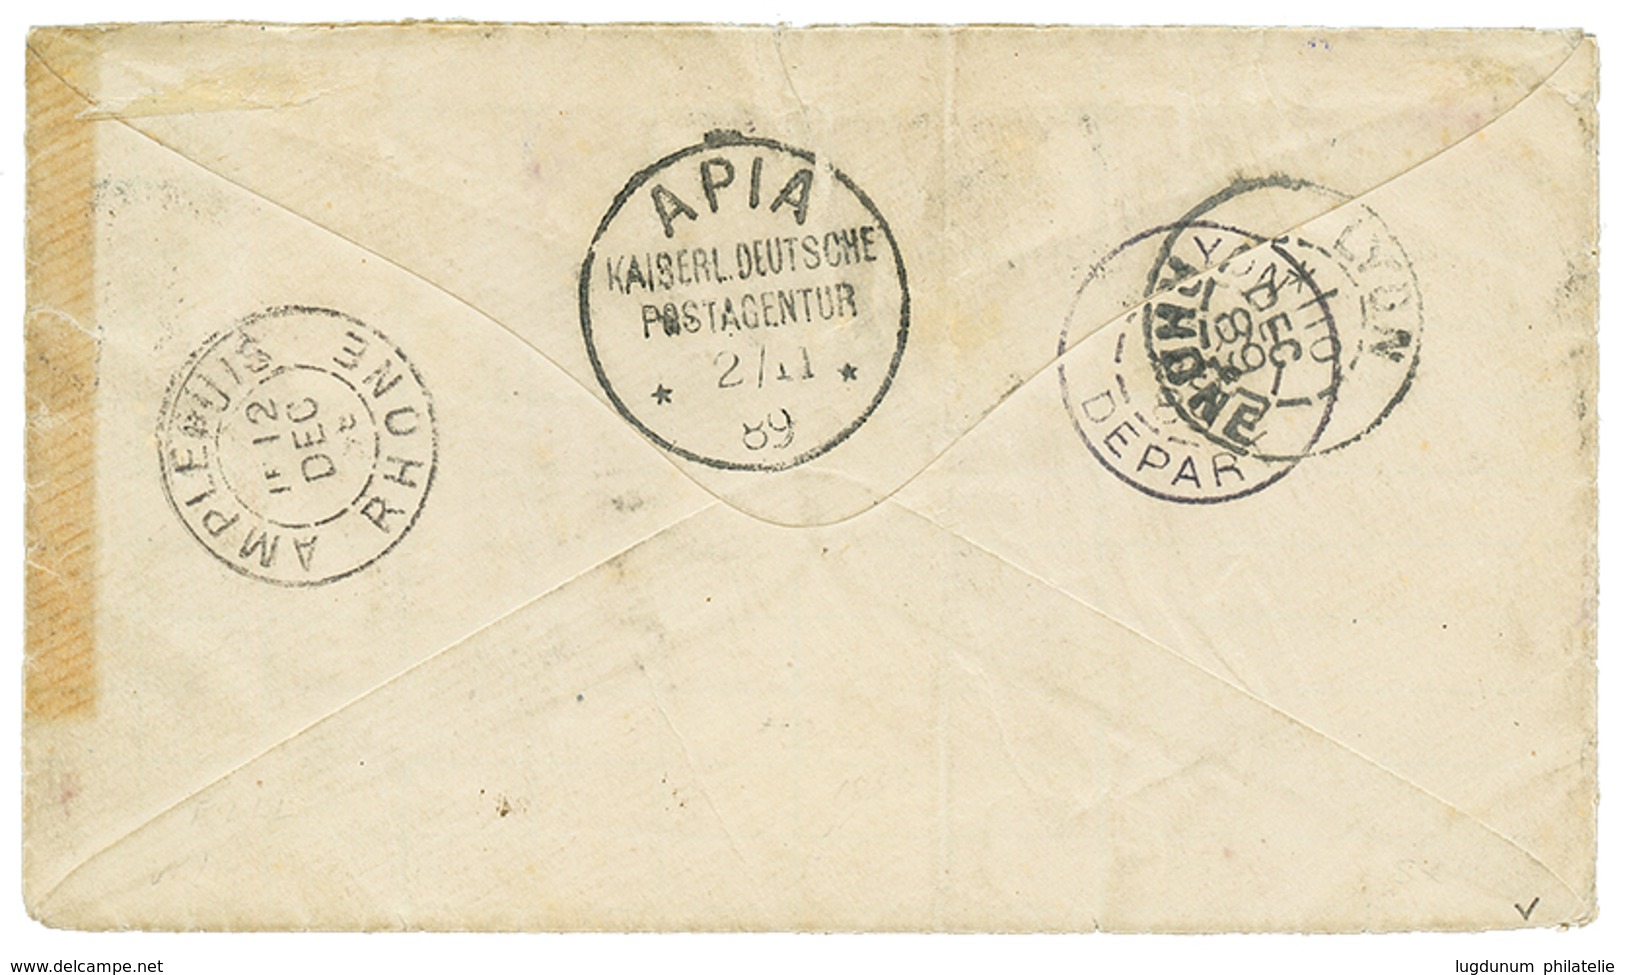 TONGA - FIRST ISSUE : 1889 2d Violet(x2) + 6d Blue + NUIKUALOFA On Envelope To FRANCE. Missionary Mail. Verso, APIA DEUT - Tonga (...-1970)